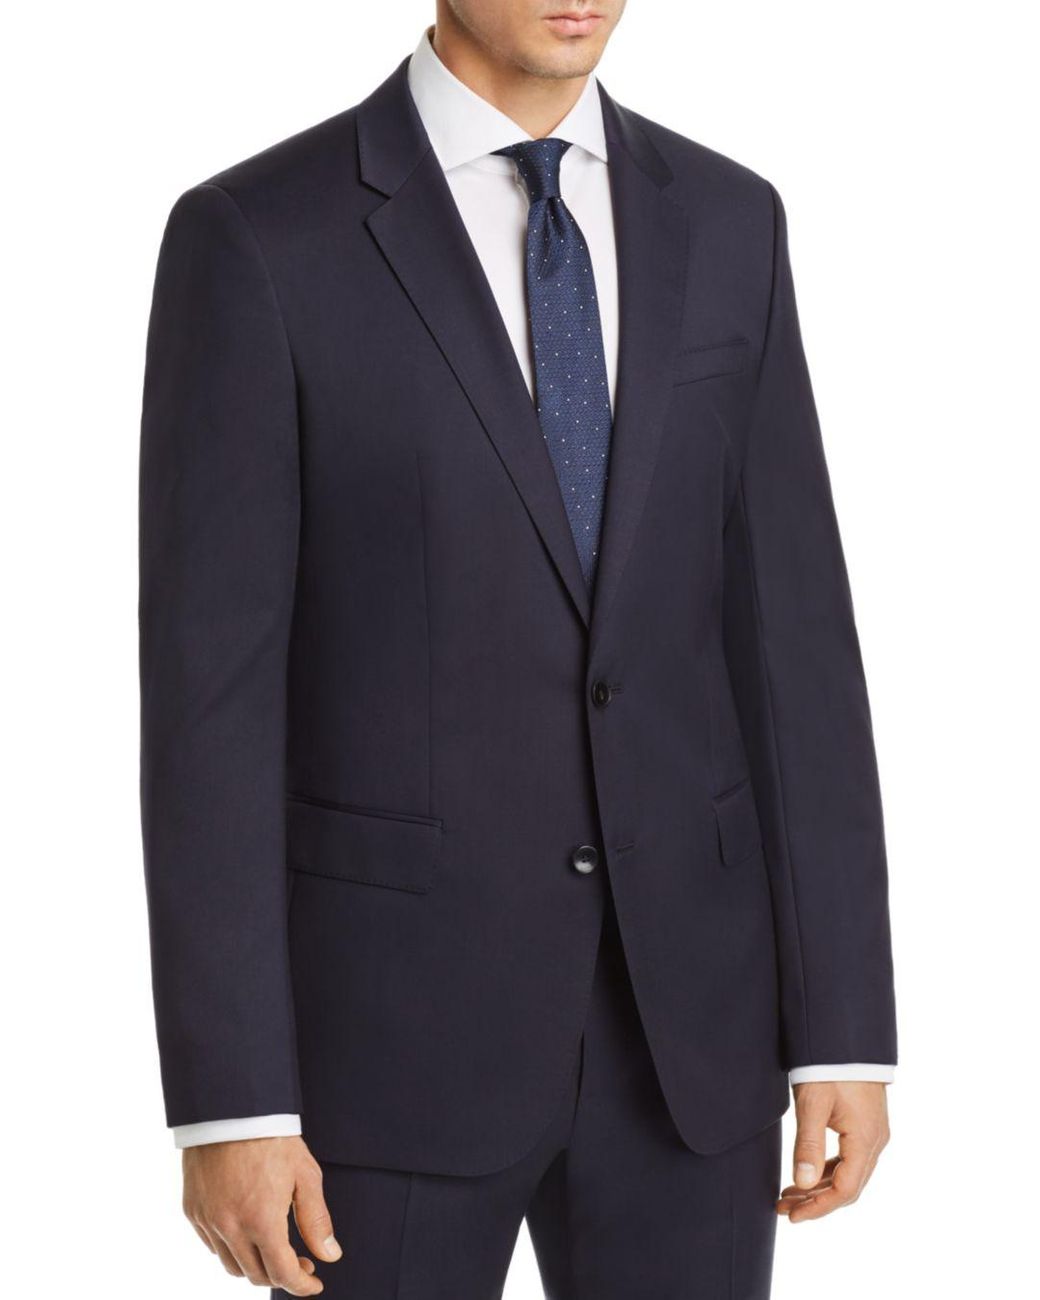 BOSS by Hugo Boss Hayes Slim Fit Create Your Look Suit Jacket in Navy  (Blue) for Men - Lyst